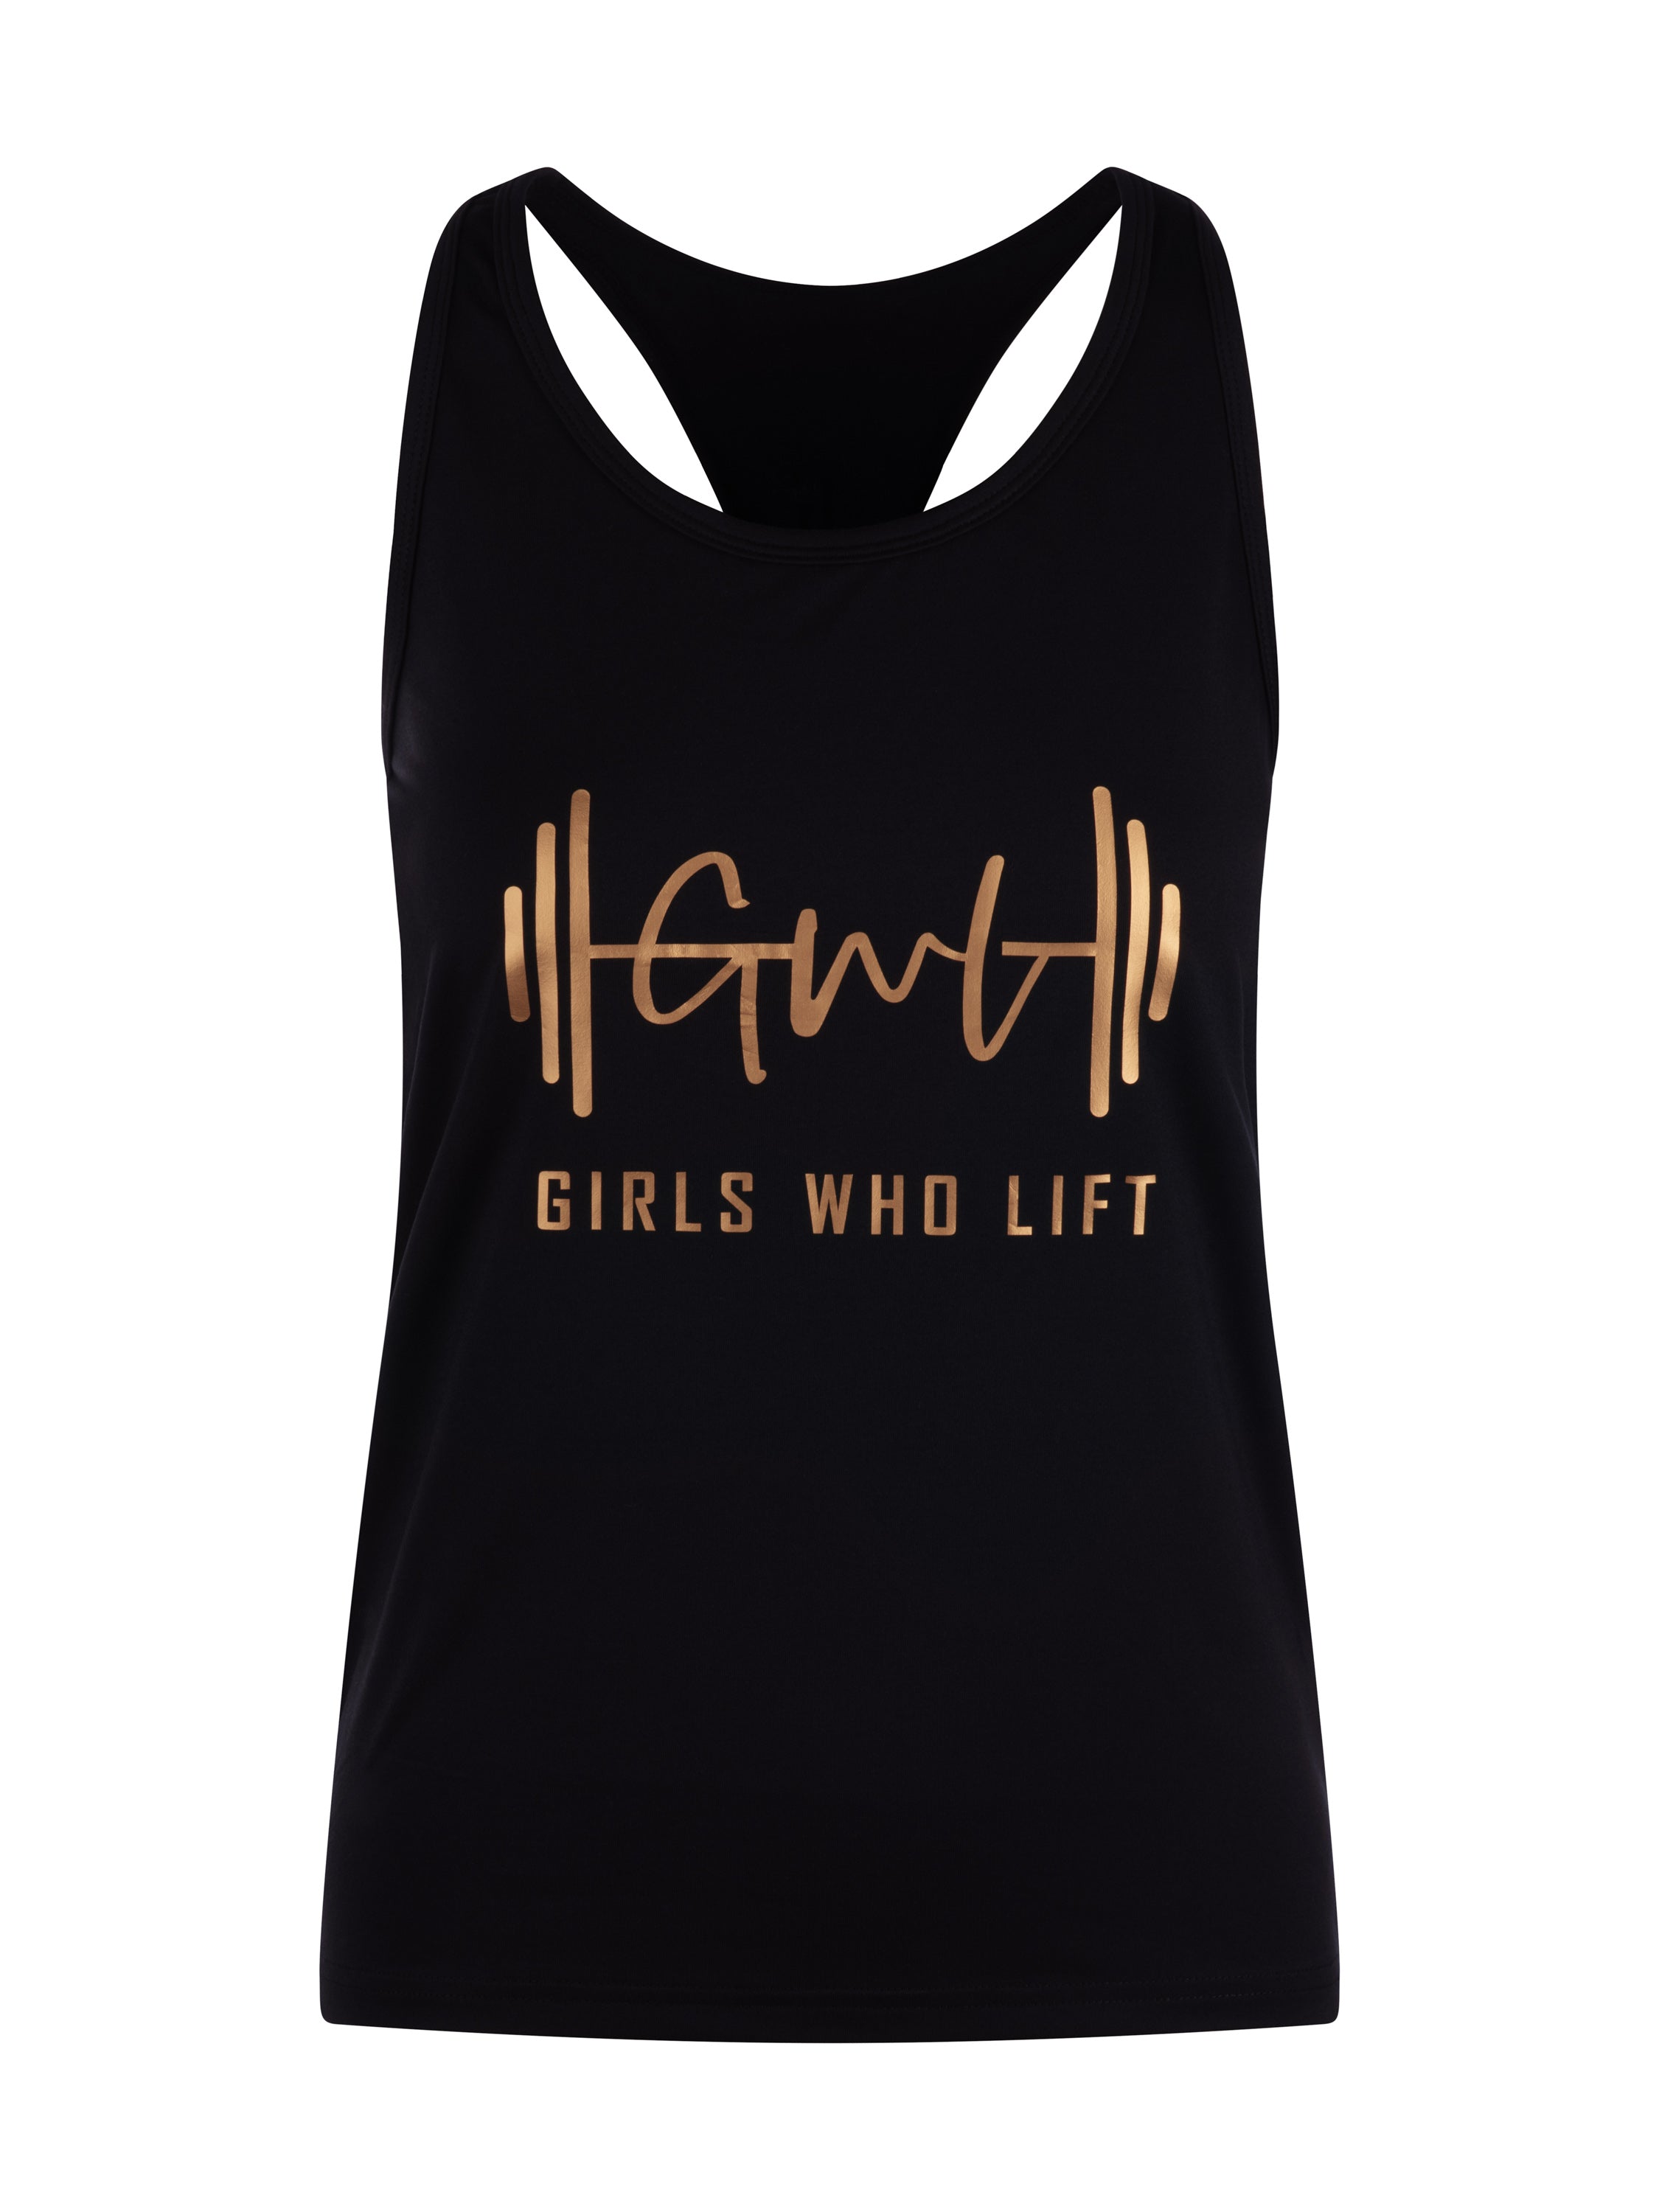 Girls Who Lift workout vest with rose gold print